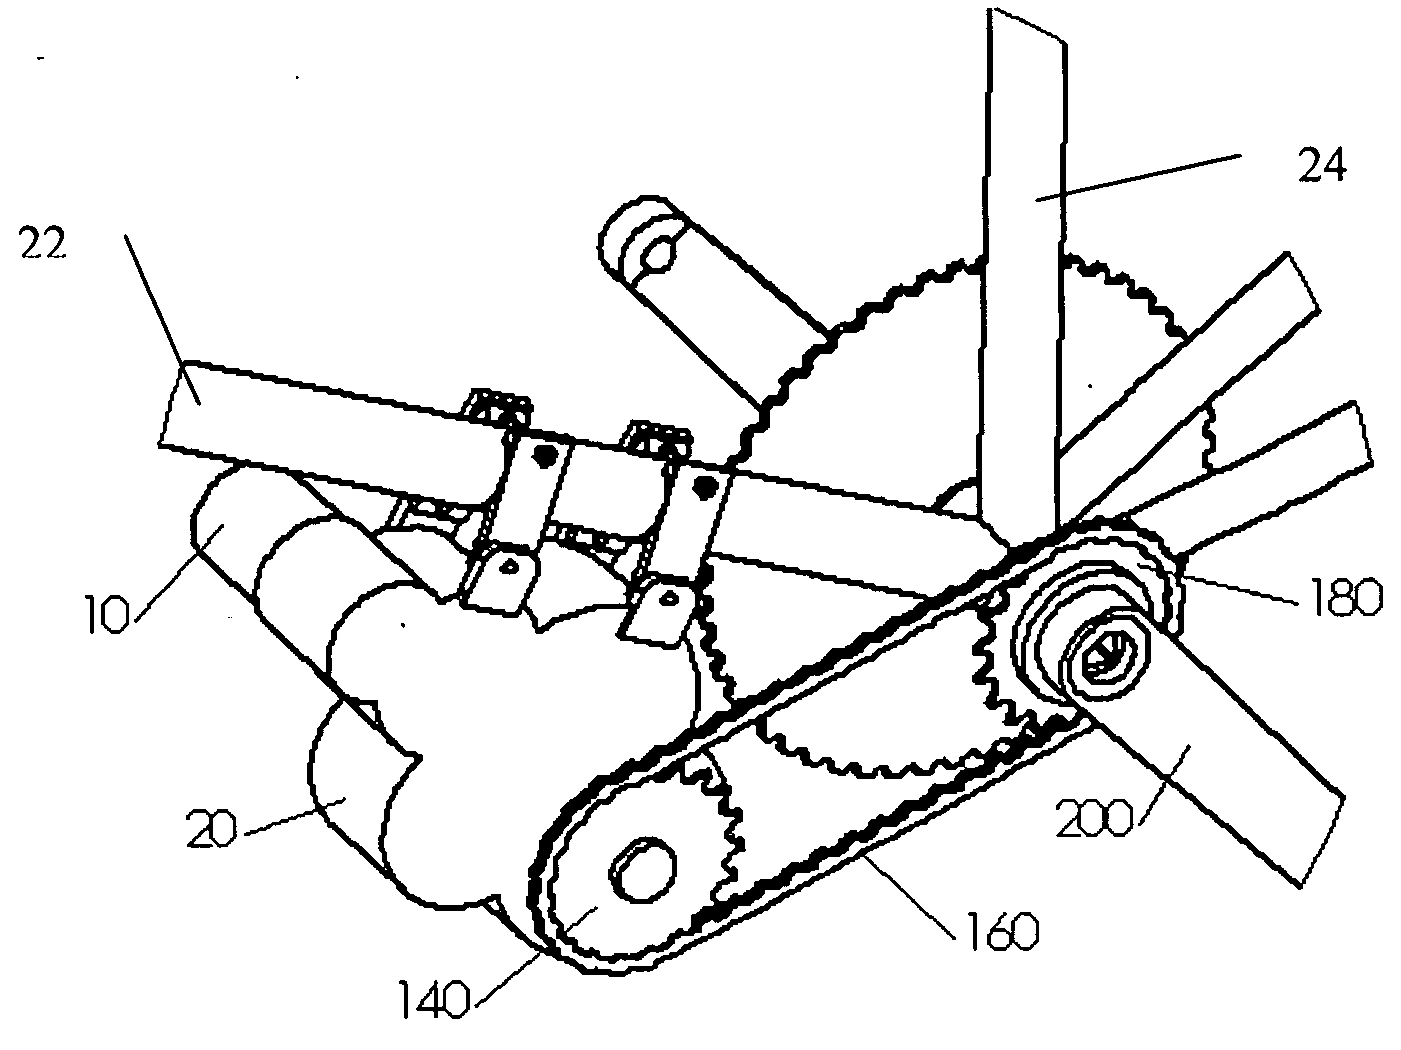 Motorized bicycle drive system using a standard freewheel and left-crank drive